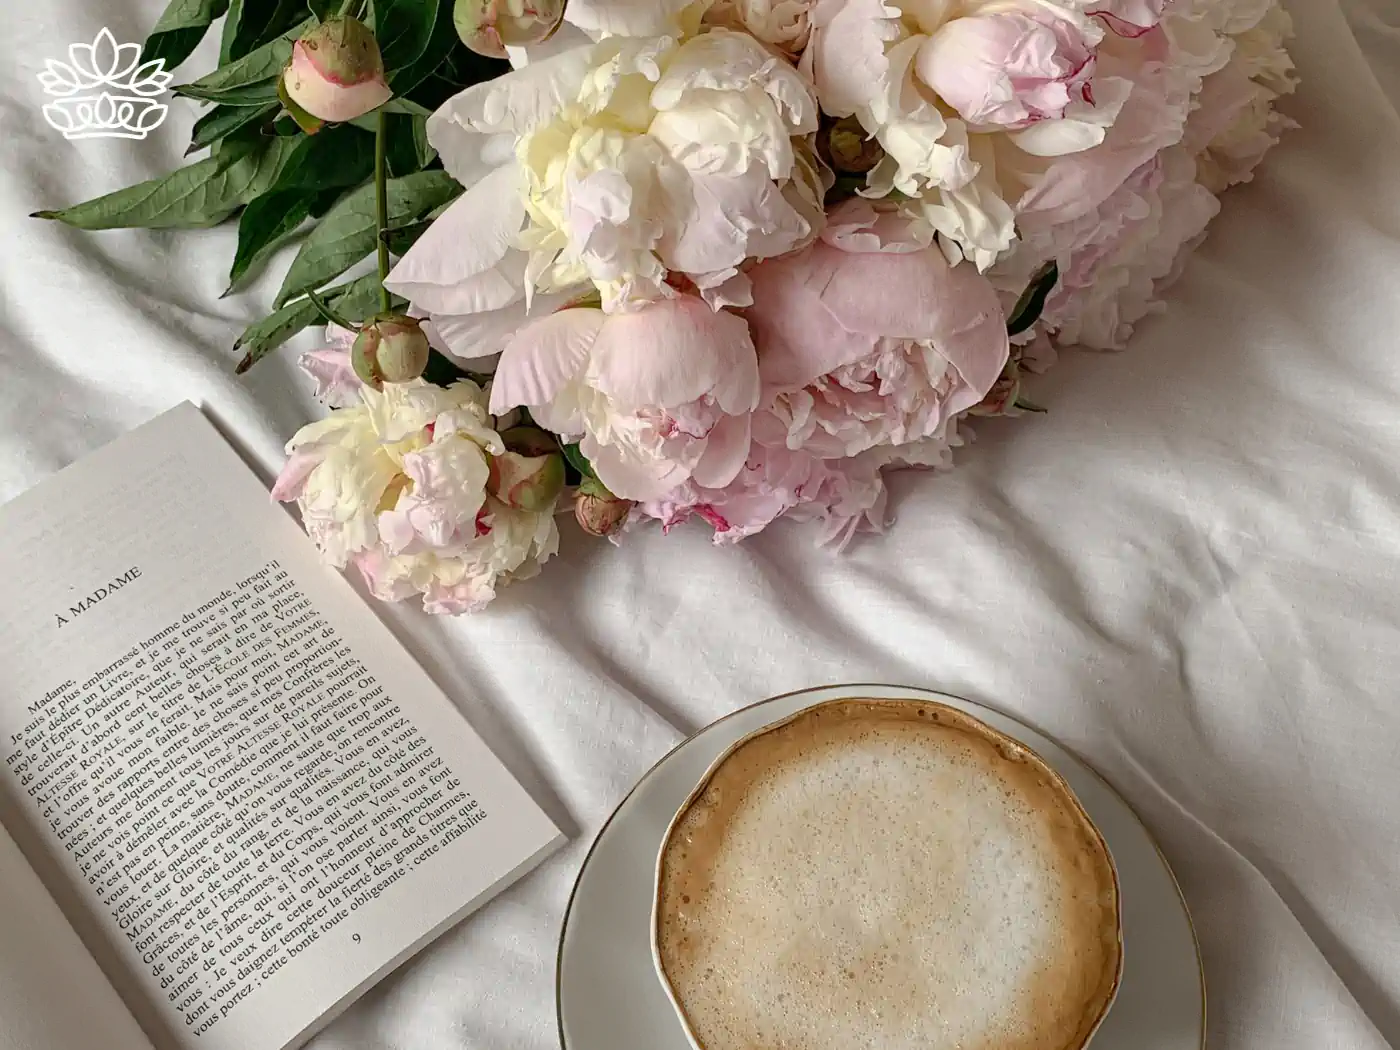 A cozy setting with a bouquet of peonies, a book, and a cup of coffee on a white blanket. Fabulous Flowers and Gifts - Peonies Collection